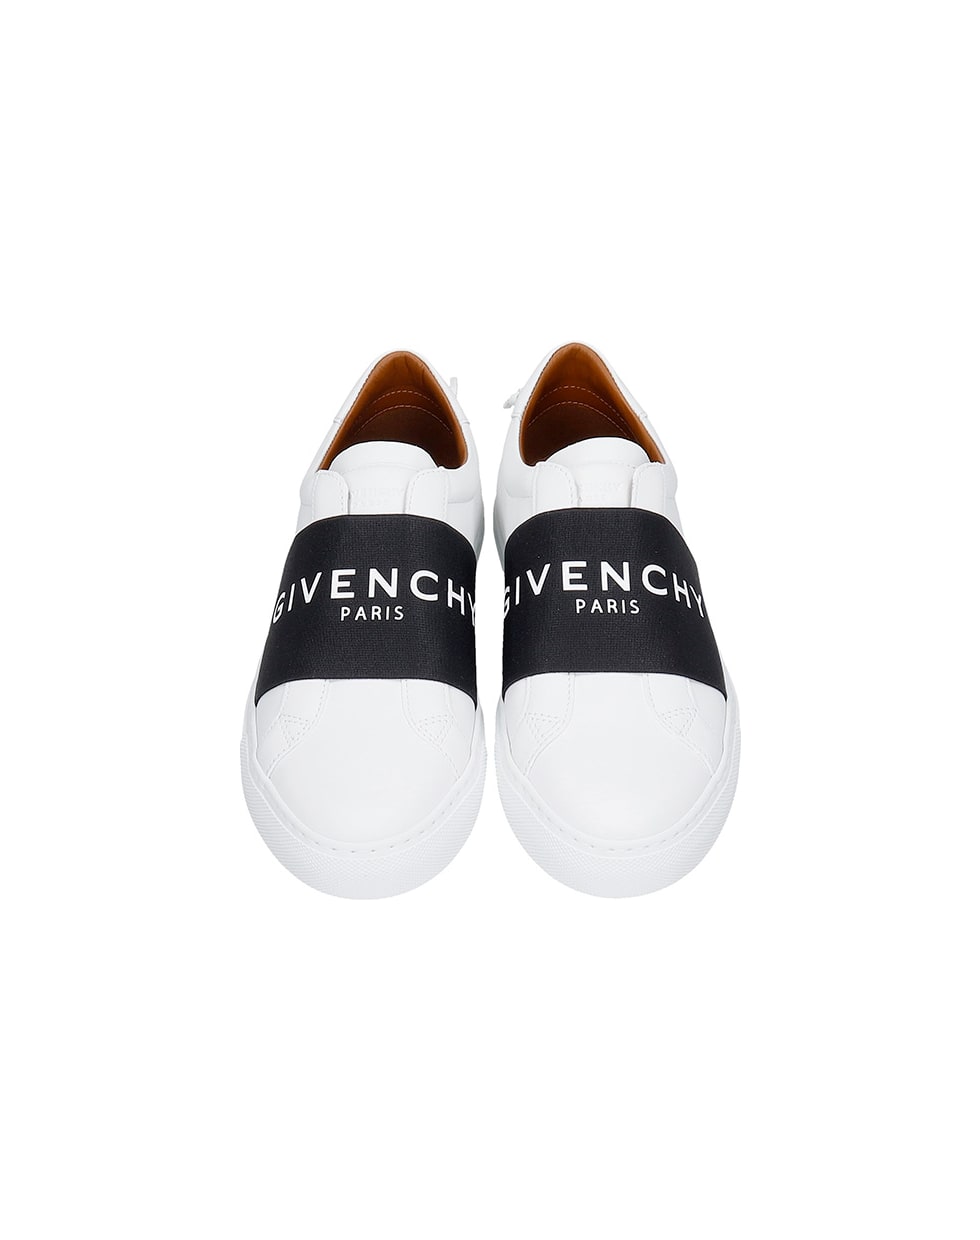 Givenchy Urban Street Sneakers In White Leather - white